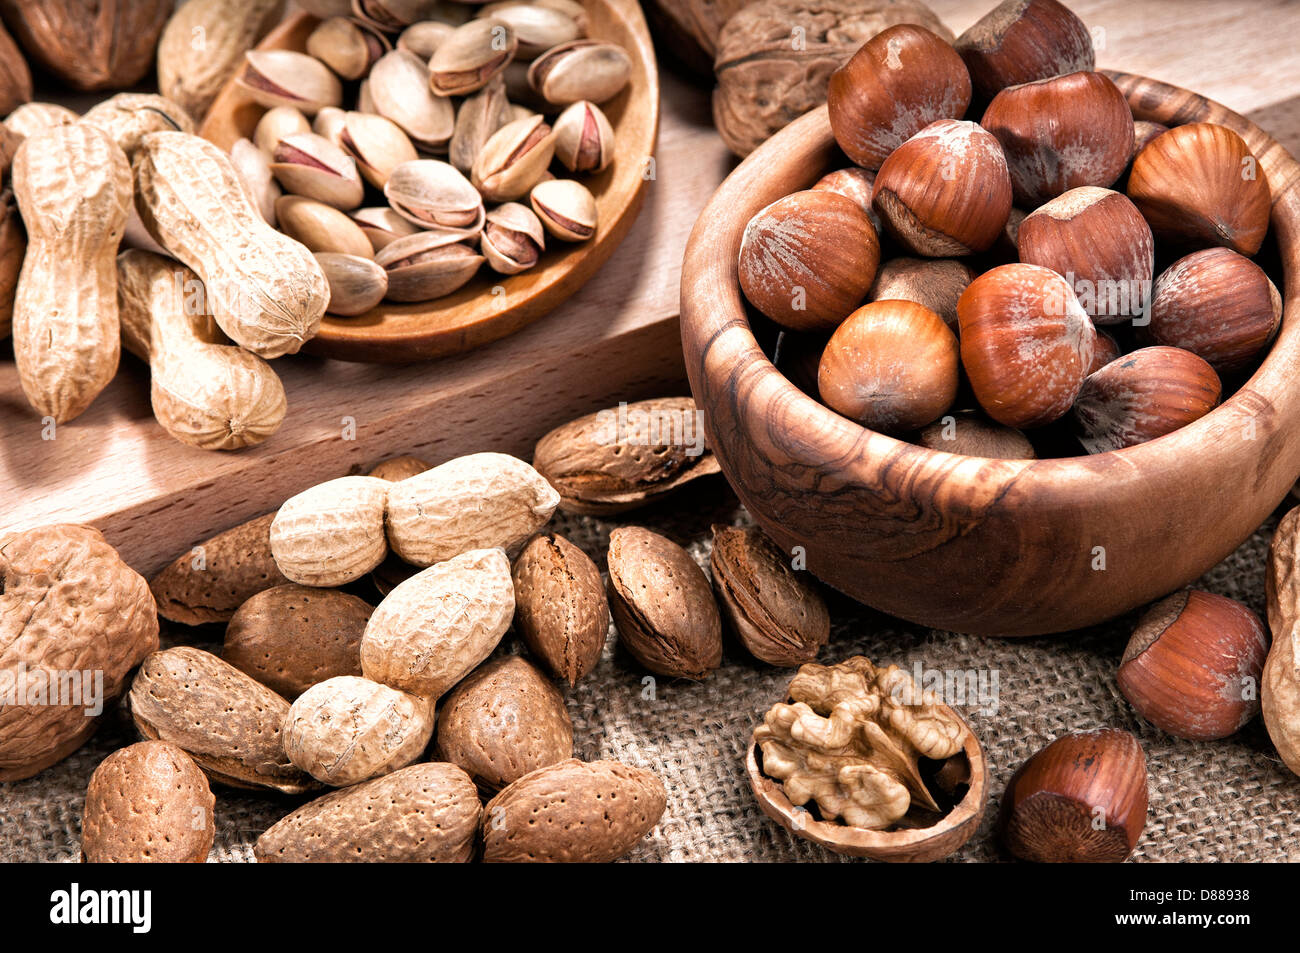 Variety of nuts Stock Photo